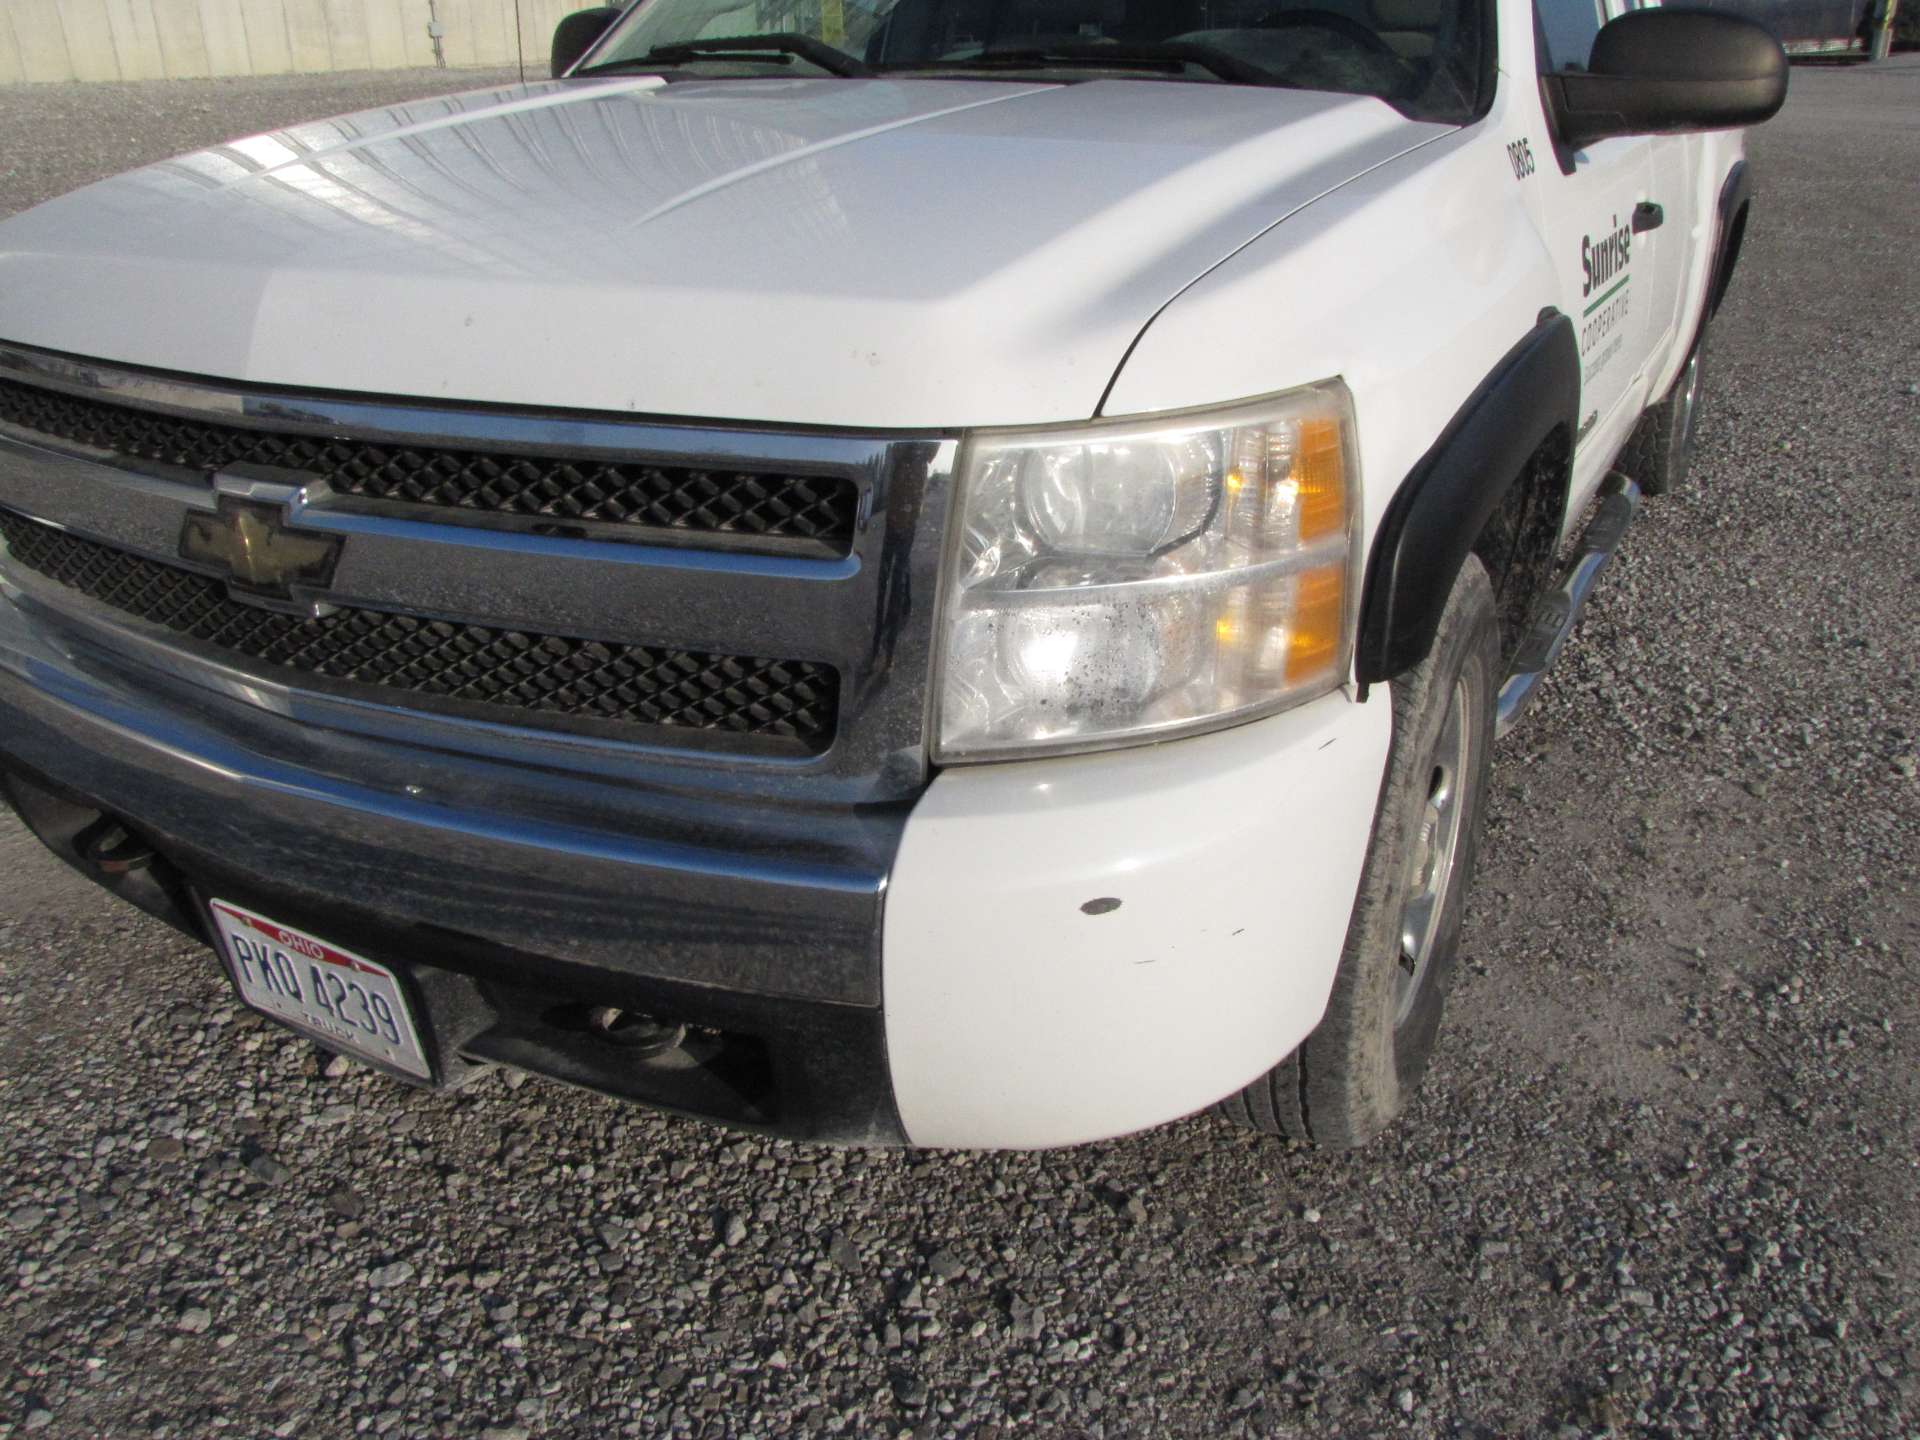 2008 Chevy Silverado 1500 LT Pickup Truck (CRACKED FRAME) - Image 10 of 43